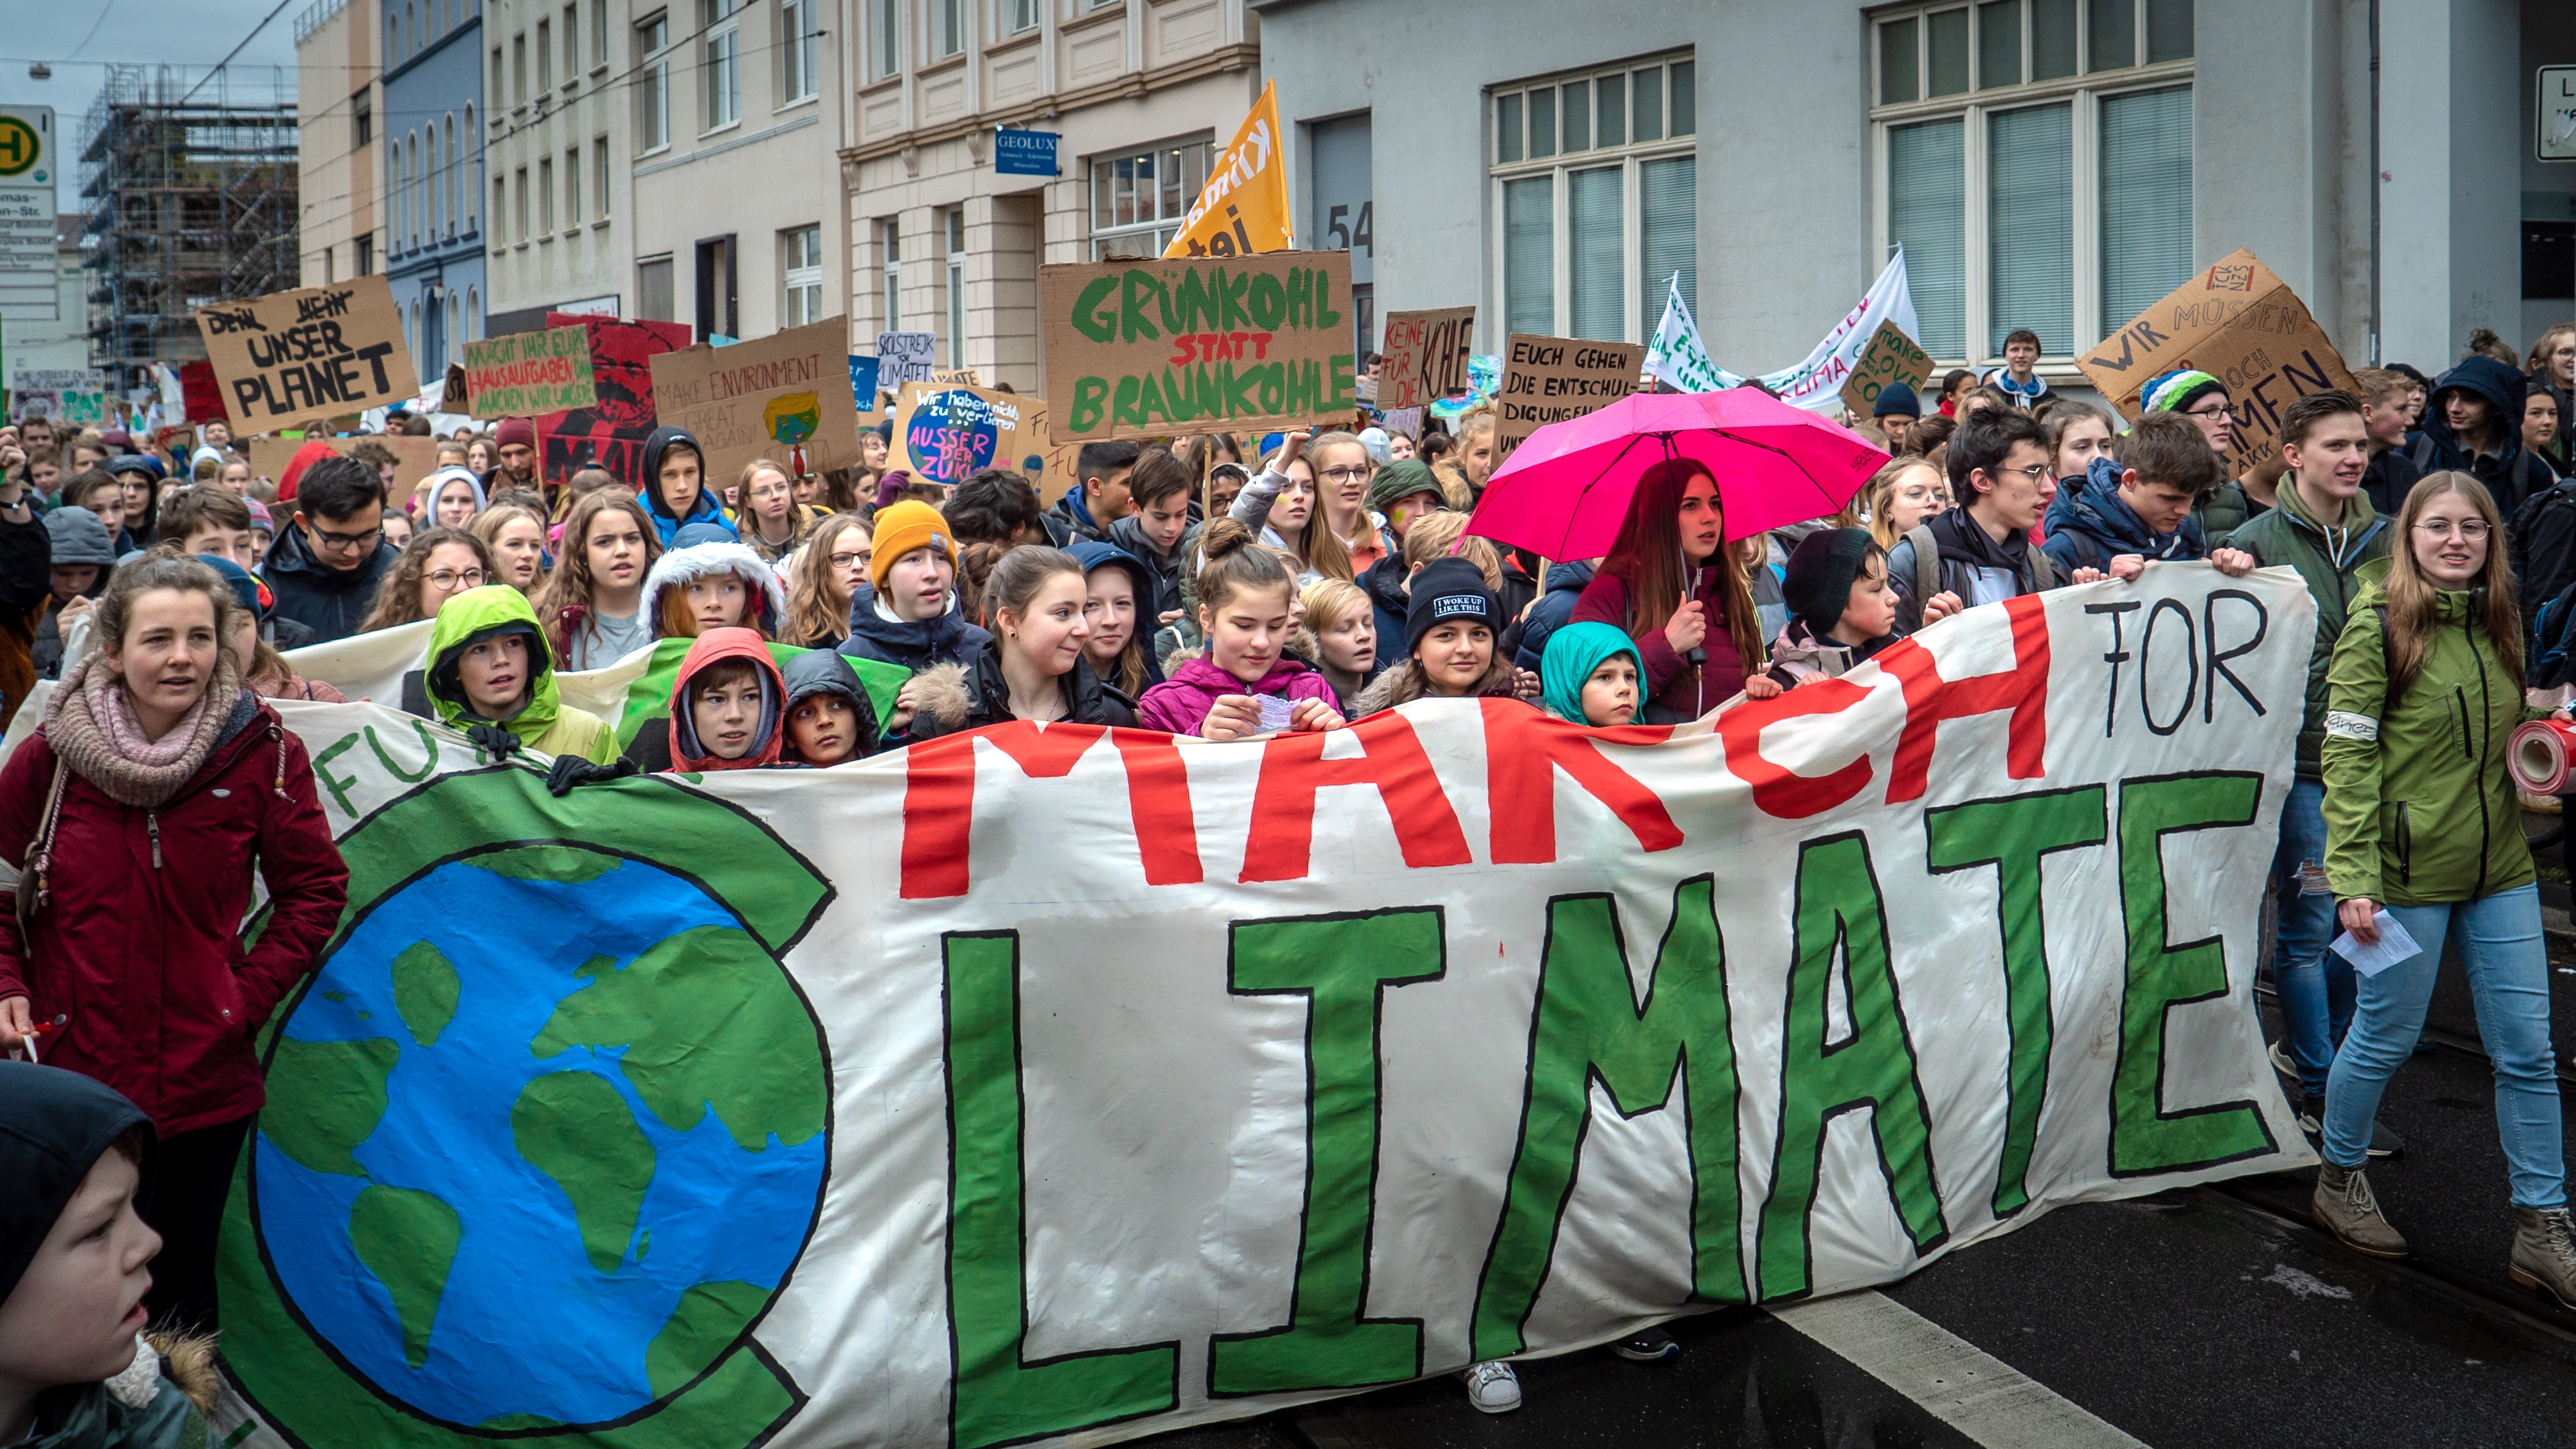 Fridays For Future march in Bonn, German, March 2019. Photo: Mica Baurmeister